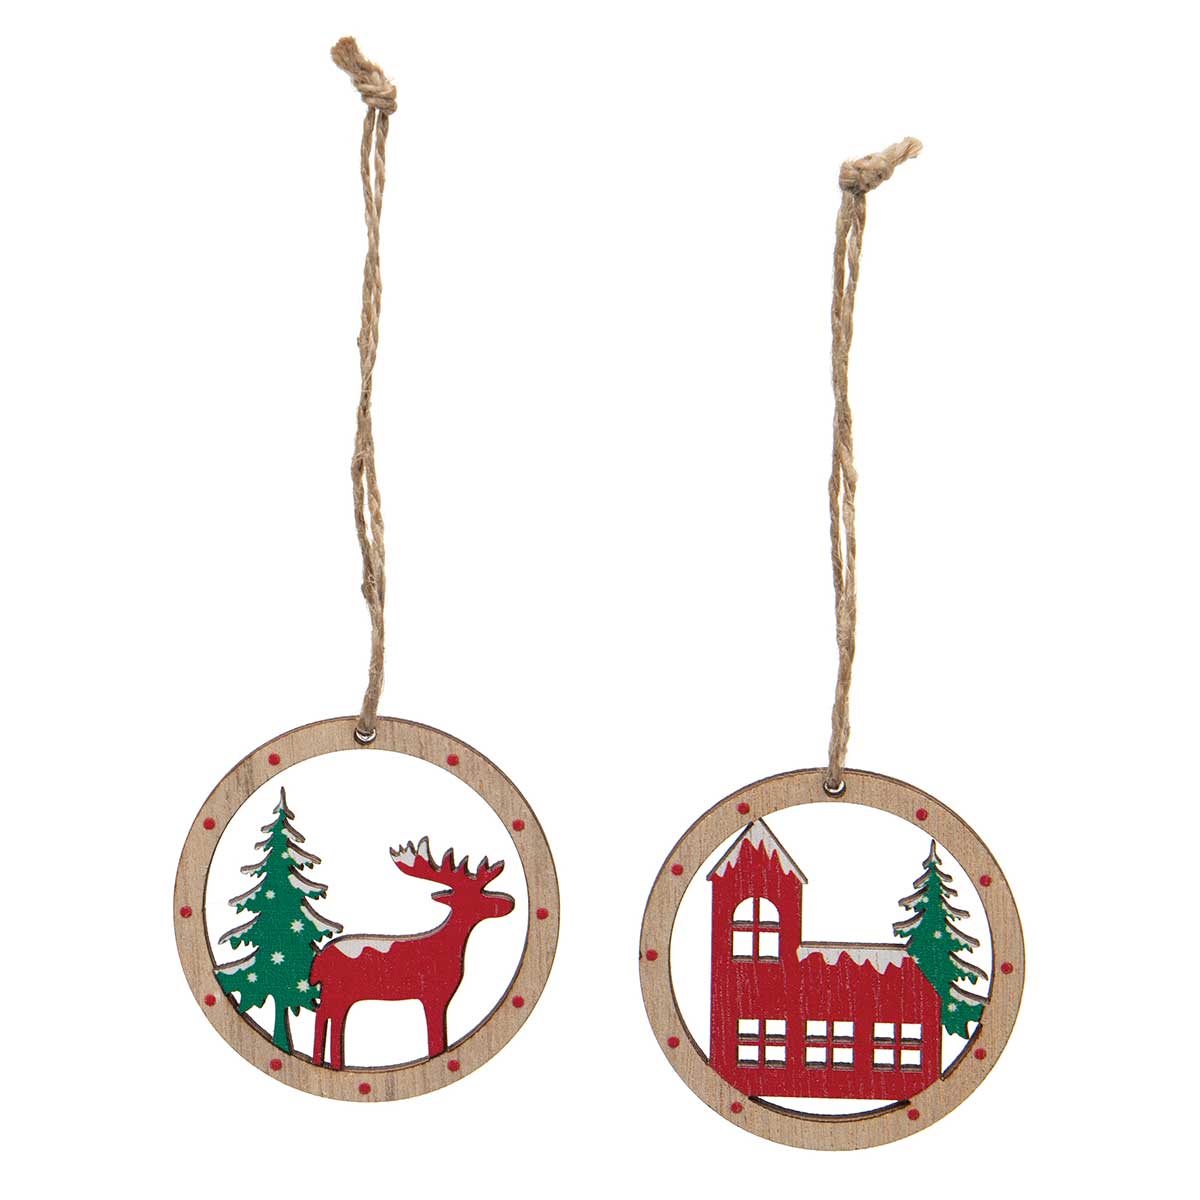 !ALPINE HOUSE AND REINDEER WOOD ORNAMENT RED/GREEN